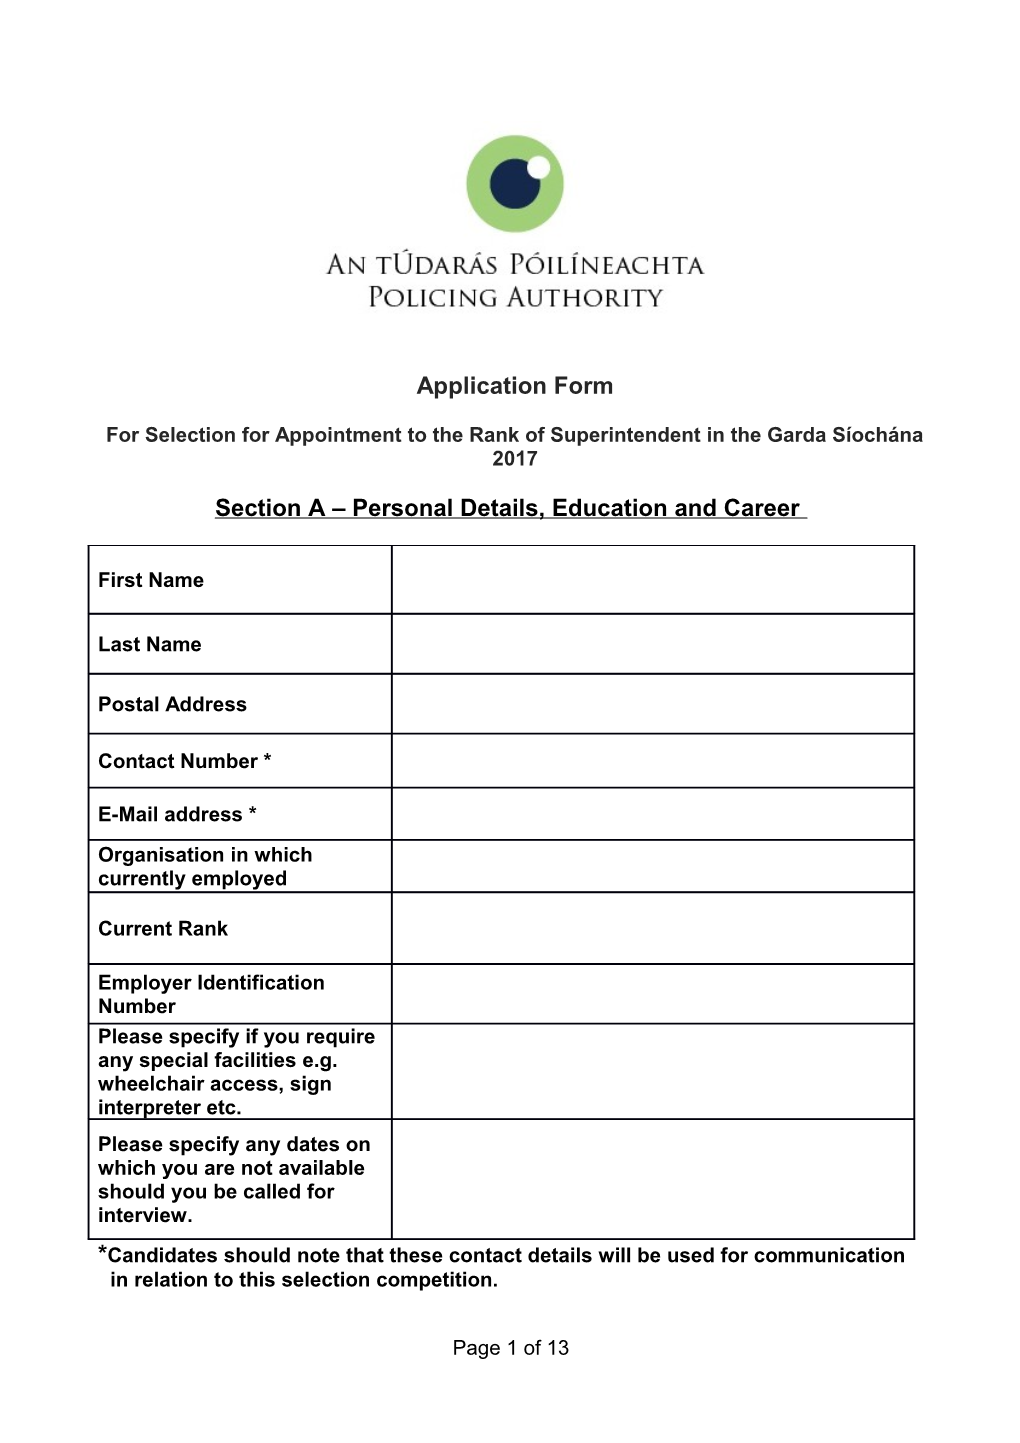 For Selection for Appointment to the Rank of Superintendentin the Garda Síochána 2017